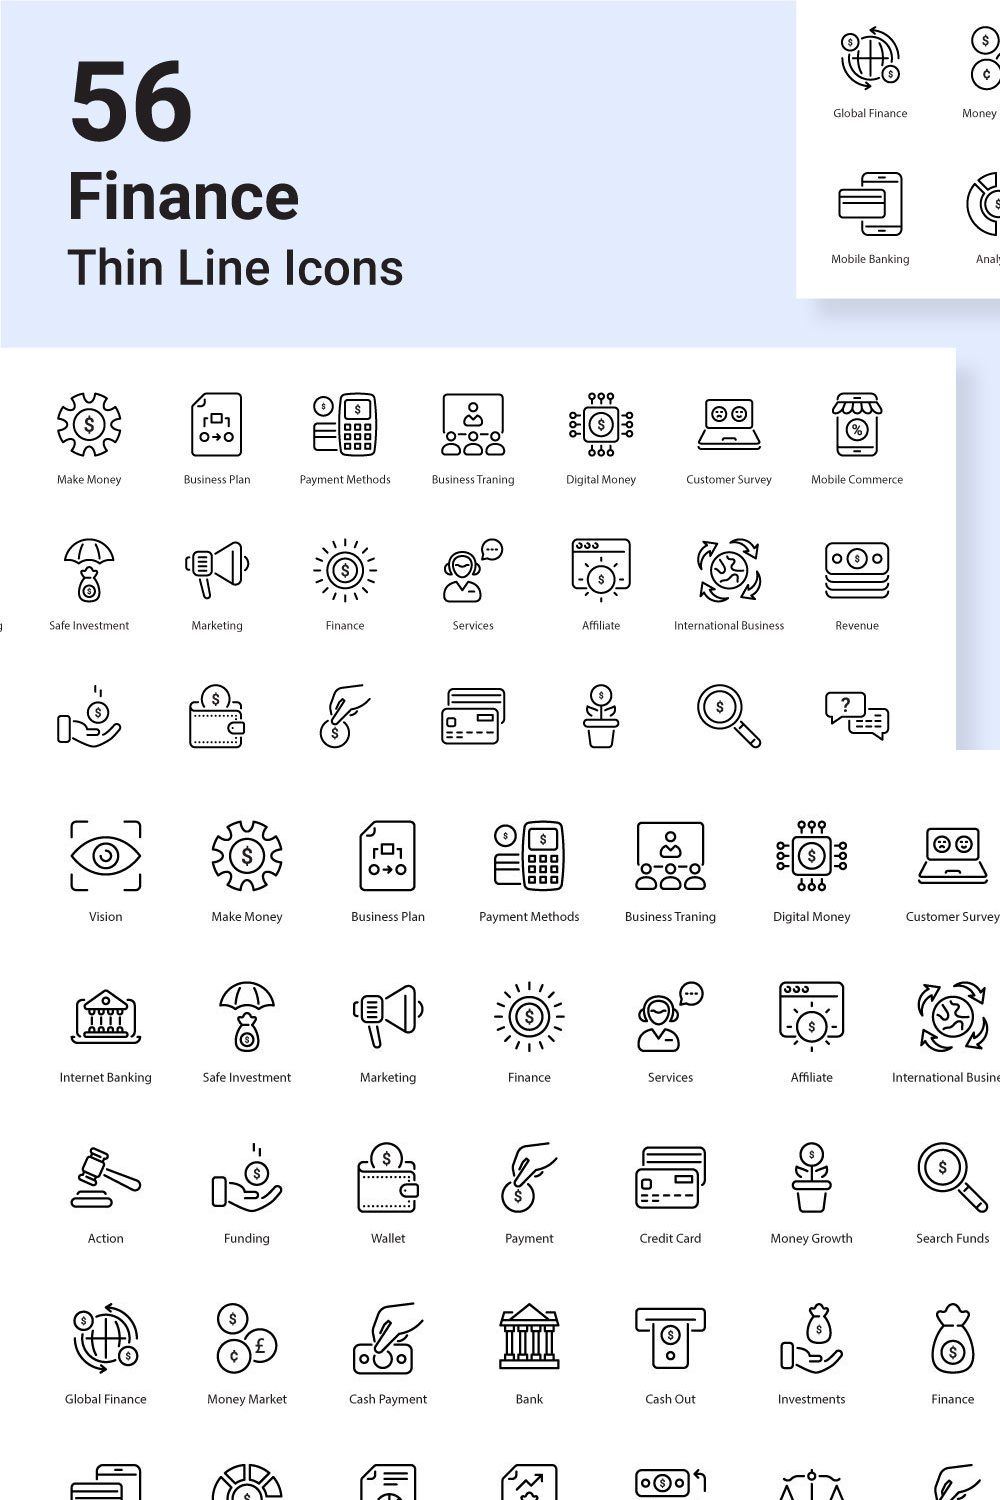 Finance 56 thin line icons pinterest preview image.